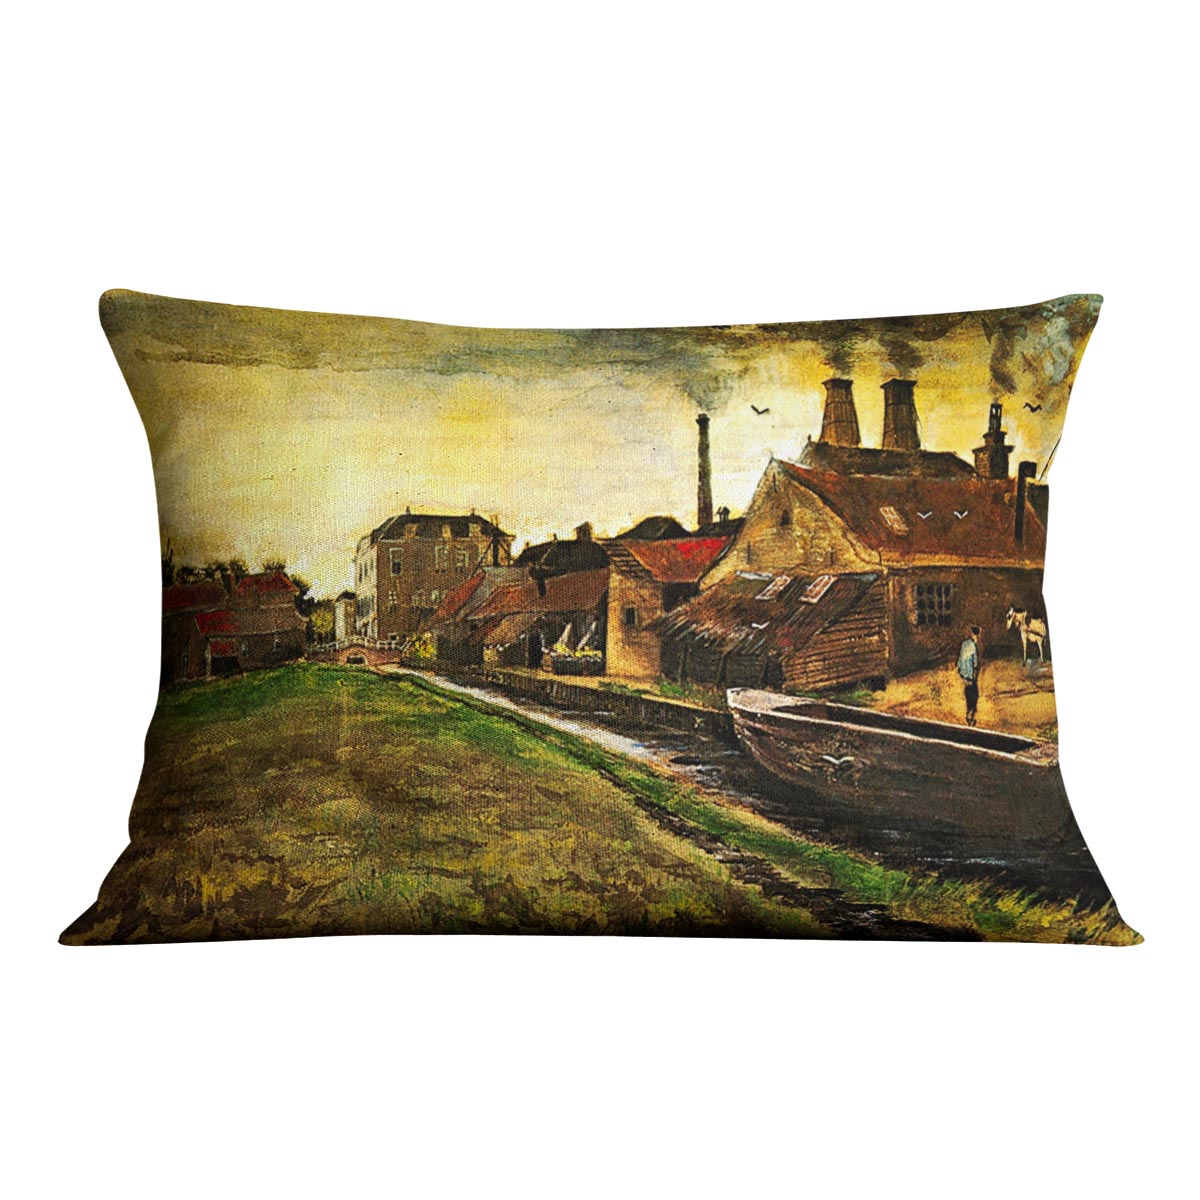 Iron Mill in The Hague by Van Gogh Cushion